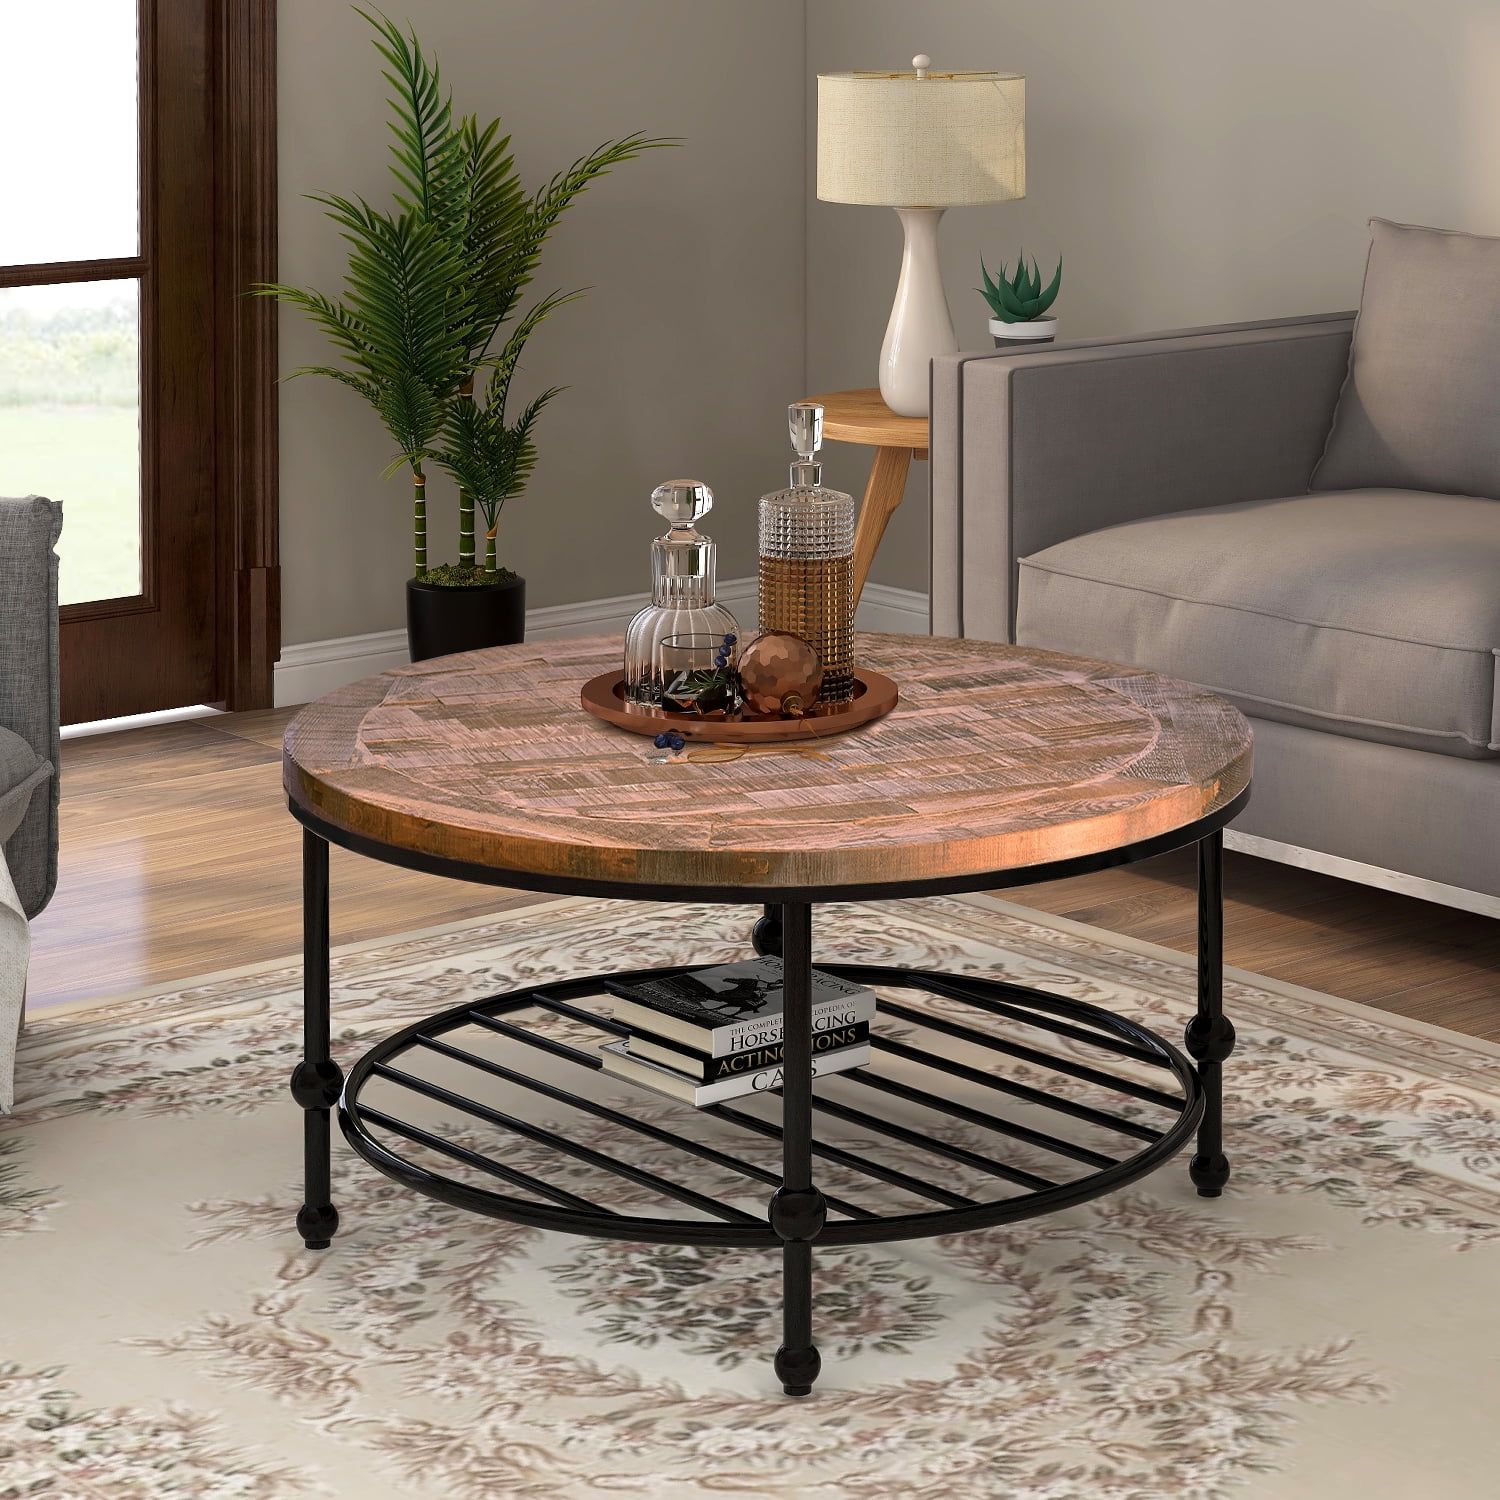 Rustic Natural Round Coffee Table With Storage Shelf For Living Room Inside Round Coffee Tables With Storage (View 4 of 15)